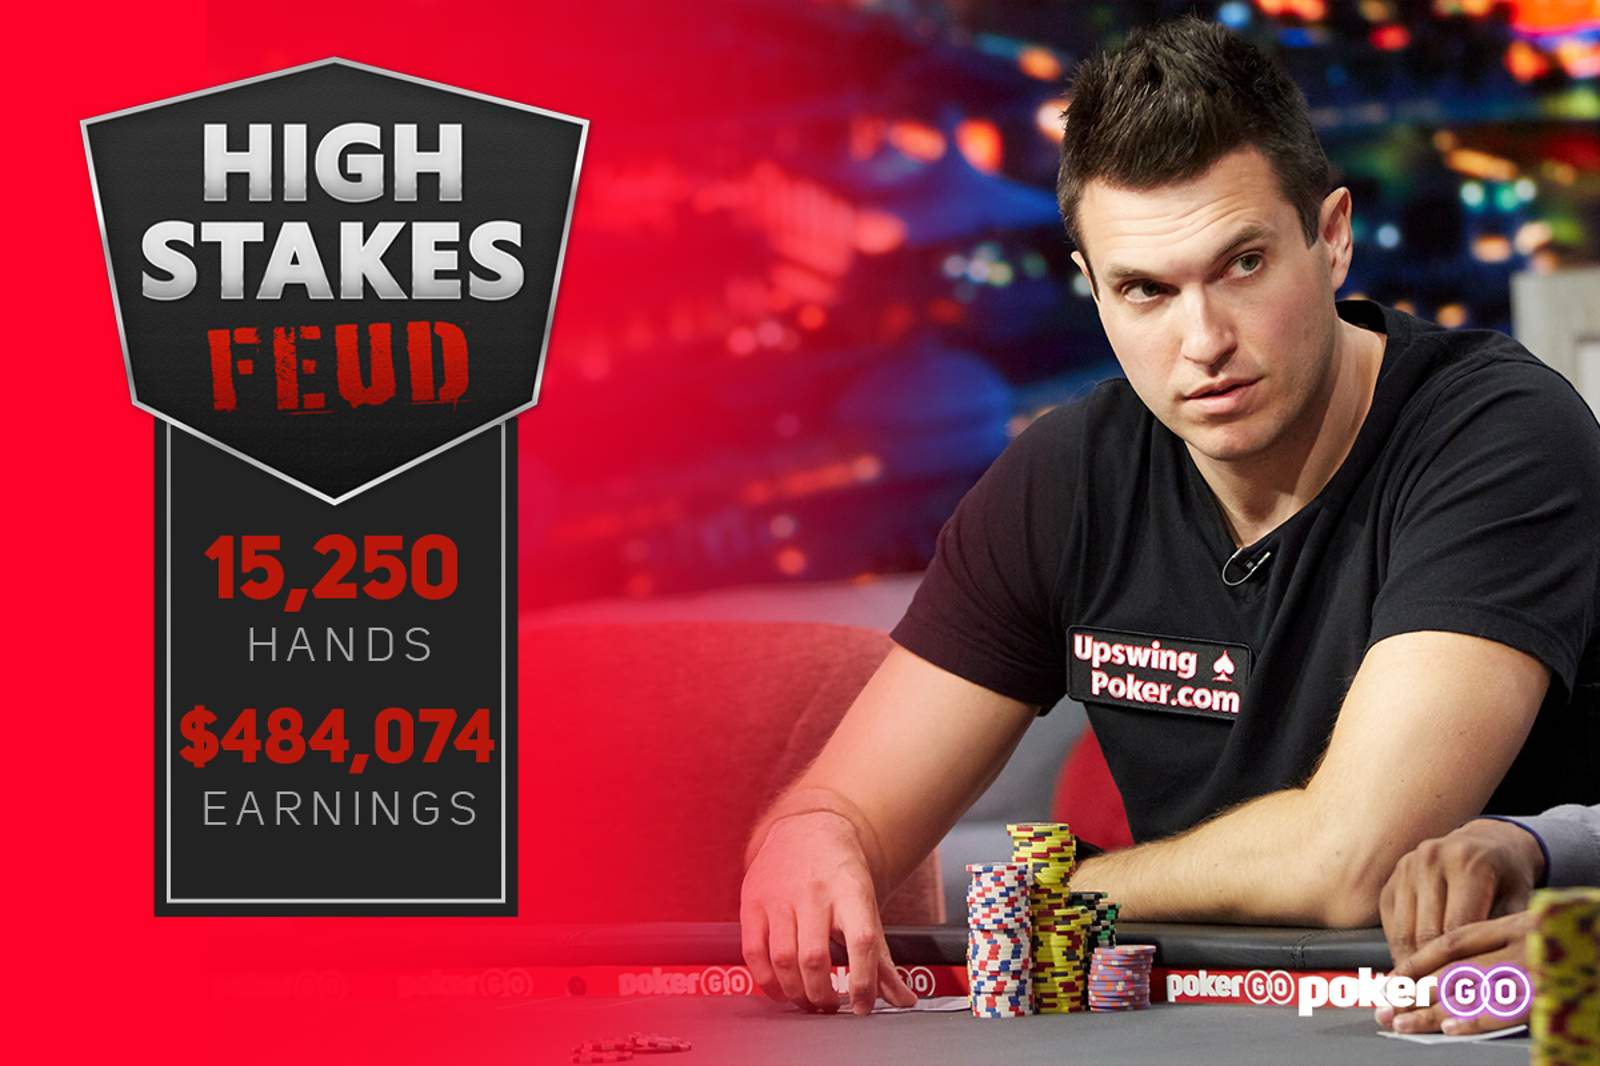 Doug Polk Leads Daniel Negreanu by $484,074 After 15,250 Hands in High Stakes Feud